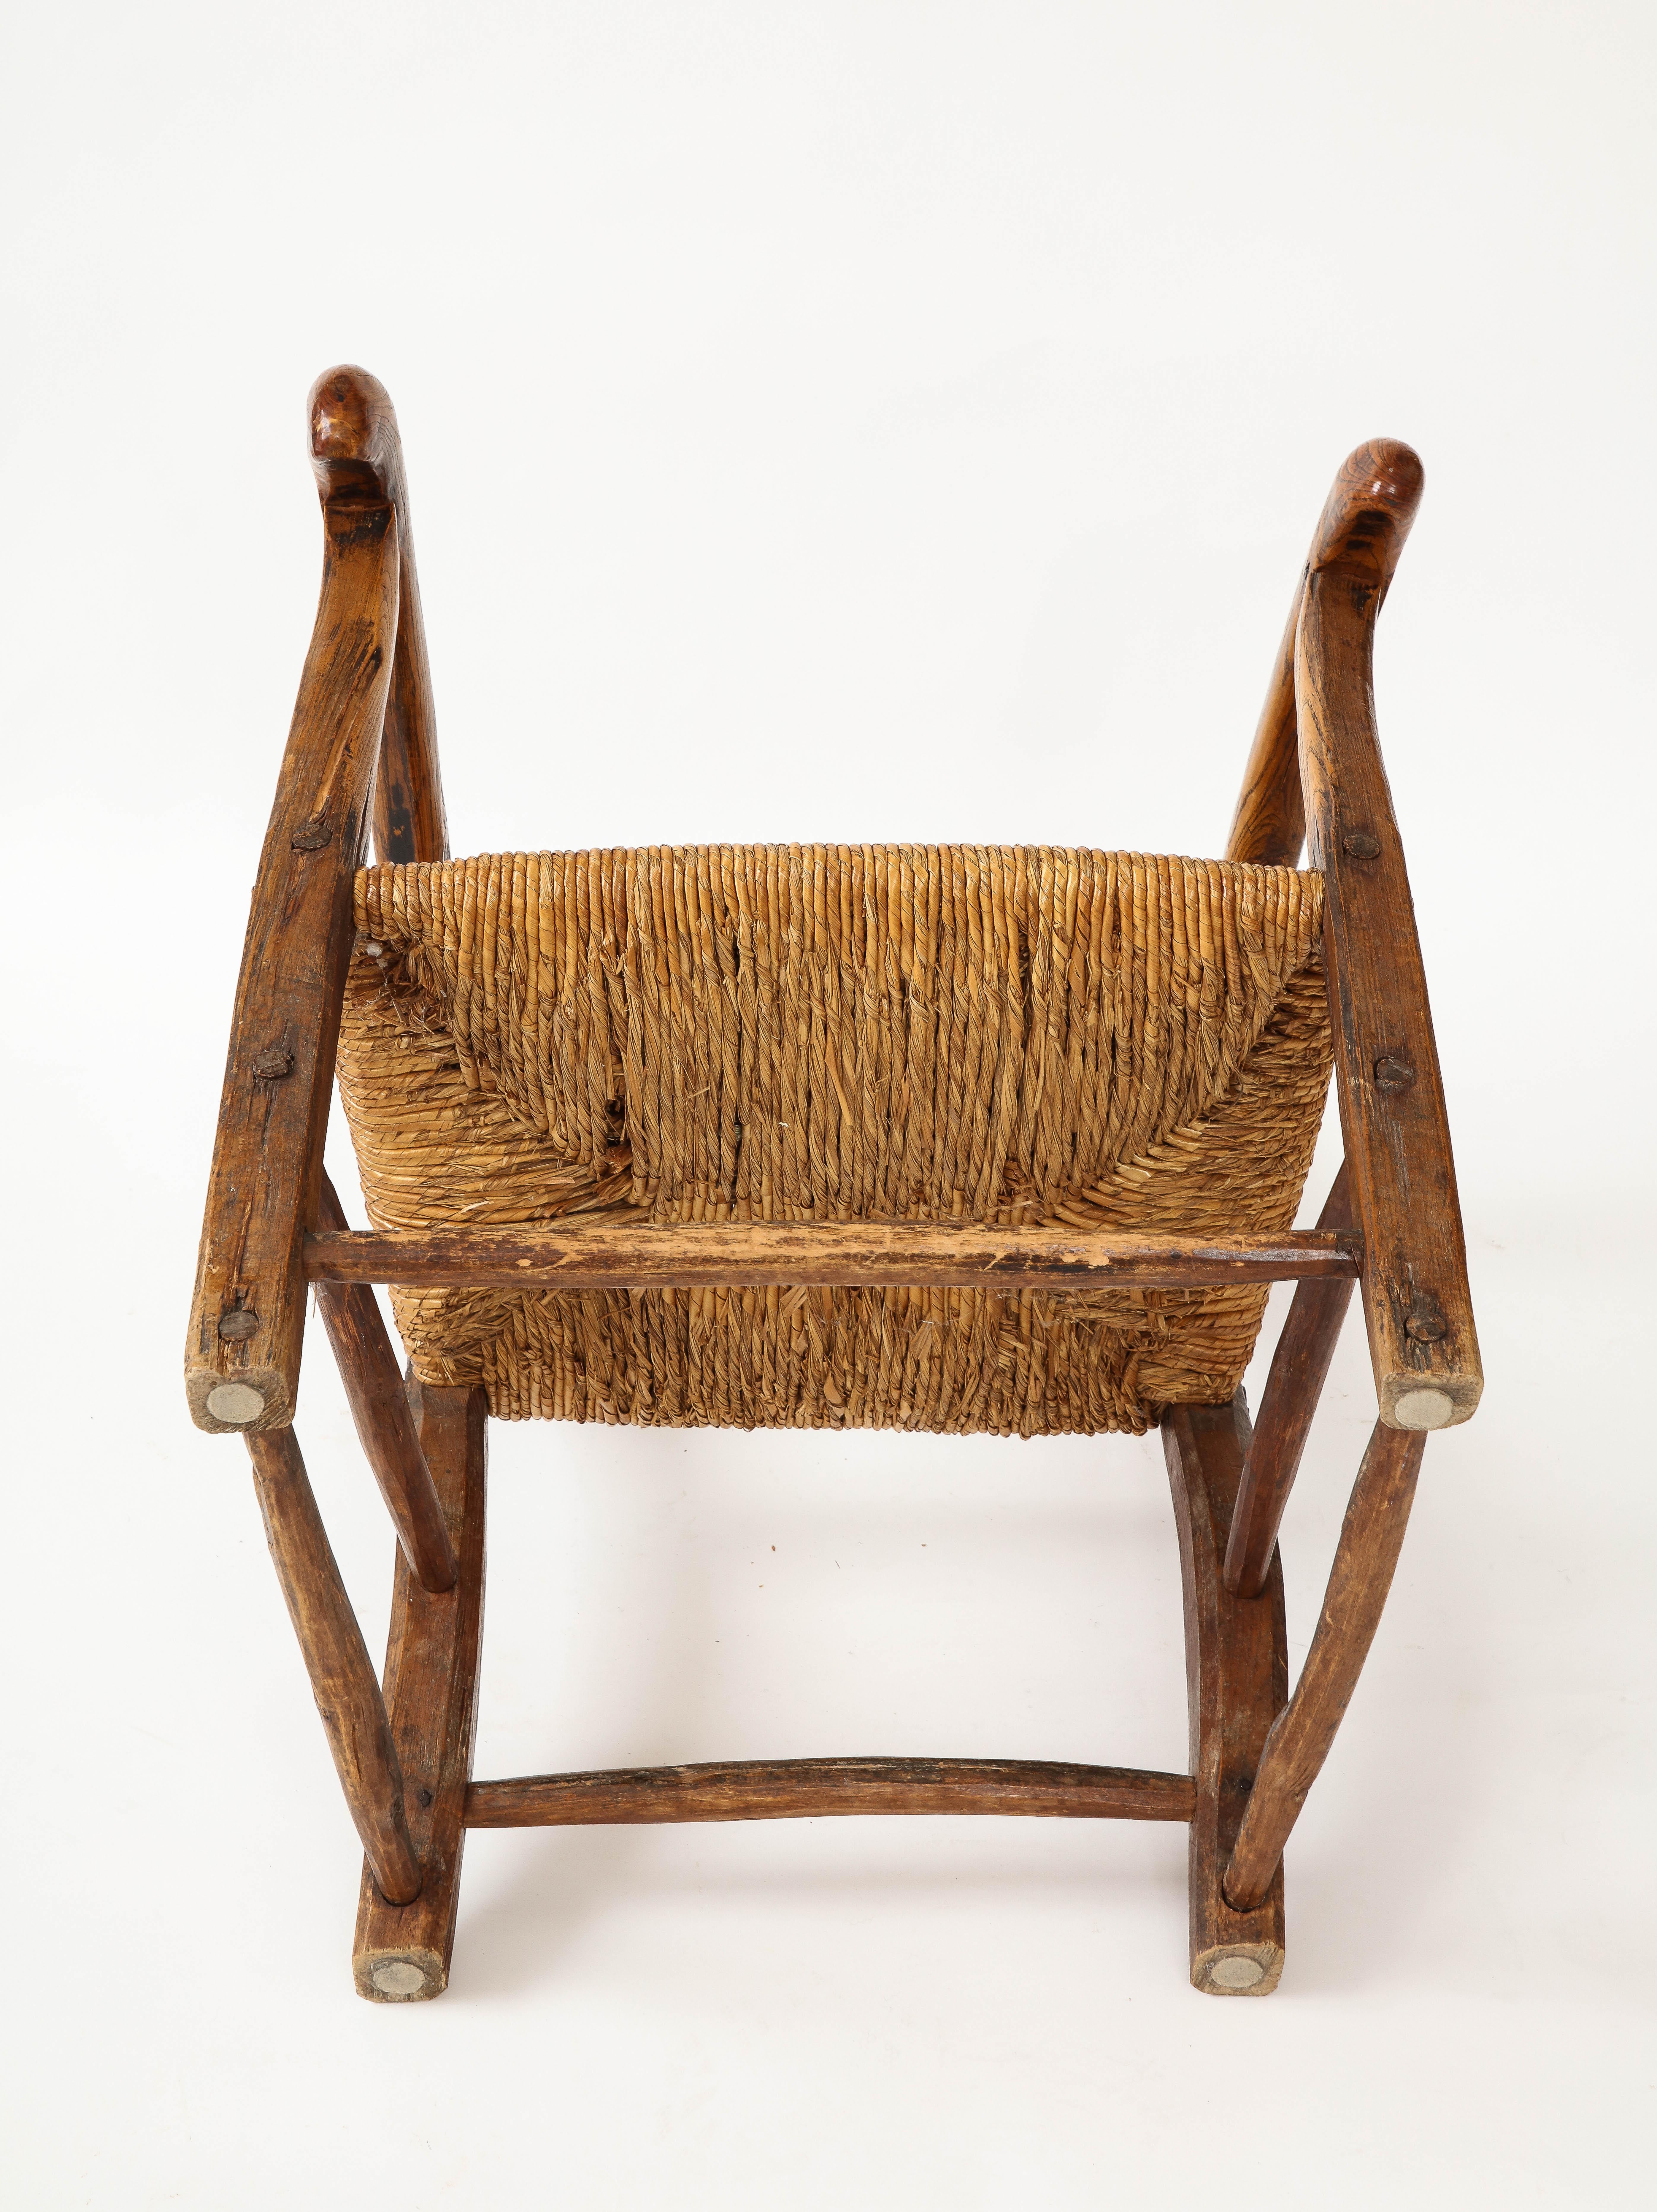 19th Century Rustic French Chair with Straw Seat For Sale 12